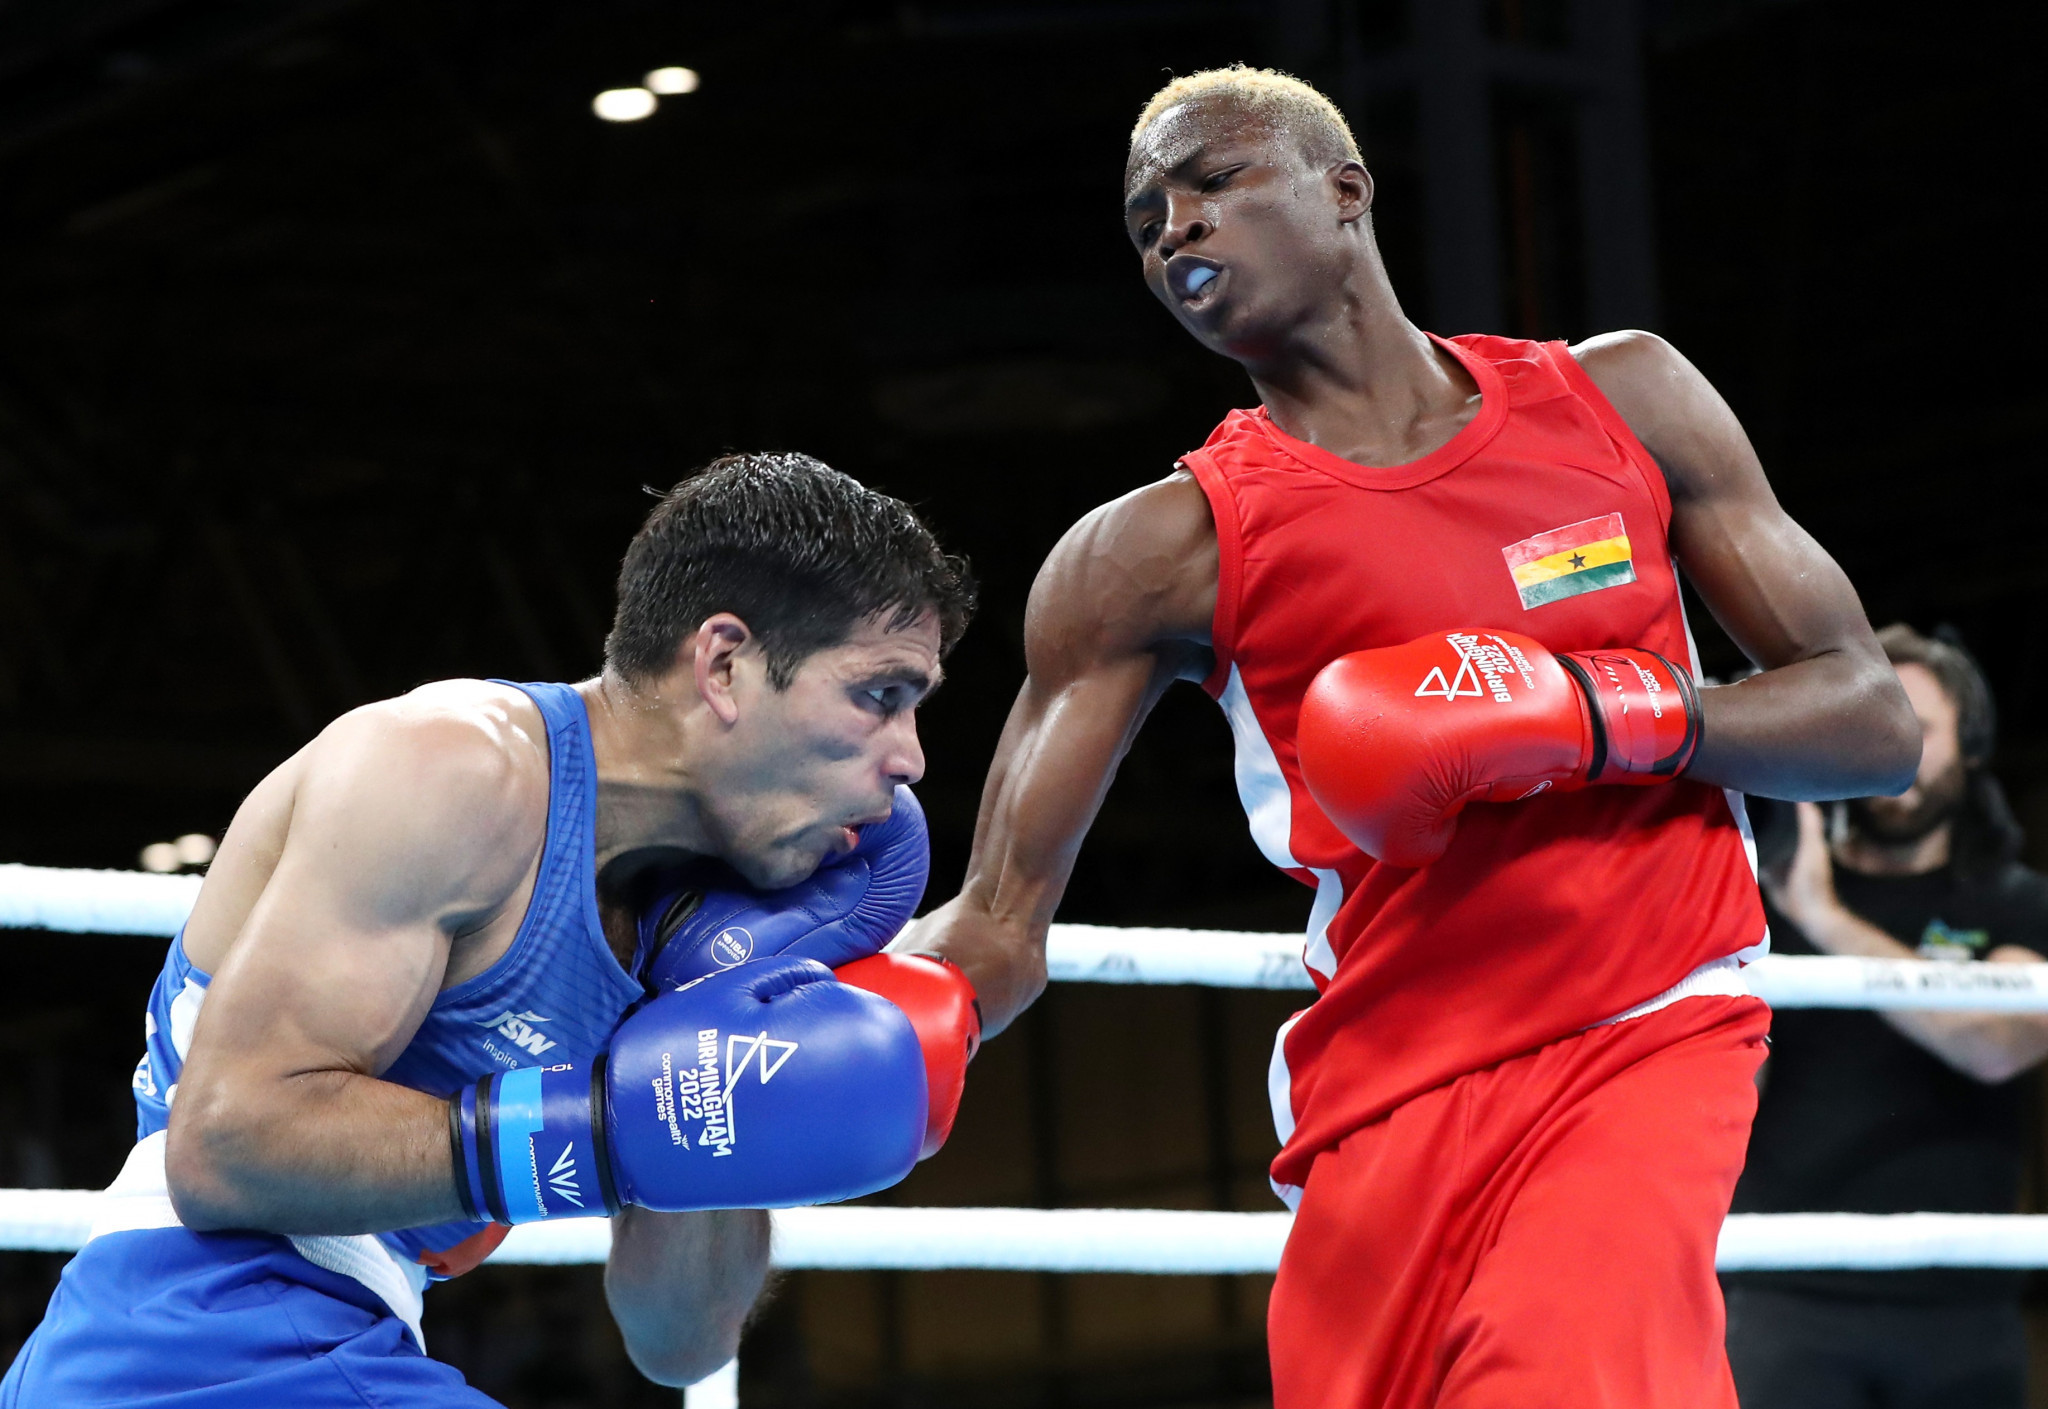 Boxing has been confirmed on the sports programme for Los Angeles 2028 and IBA President Umar Kremlev remains confident that his organisation will regain the responsibility of running the sport at the Olympics ©Getty Images